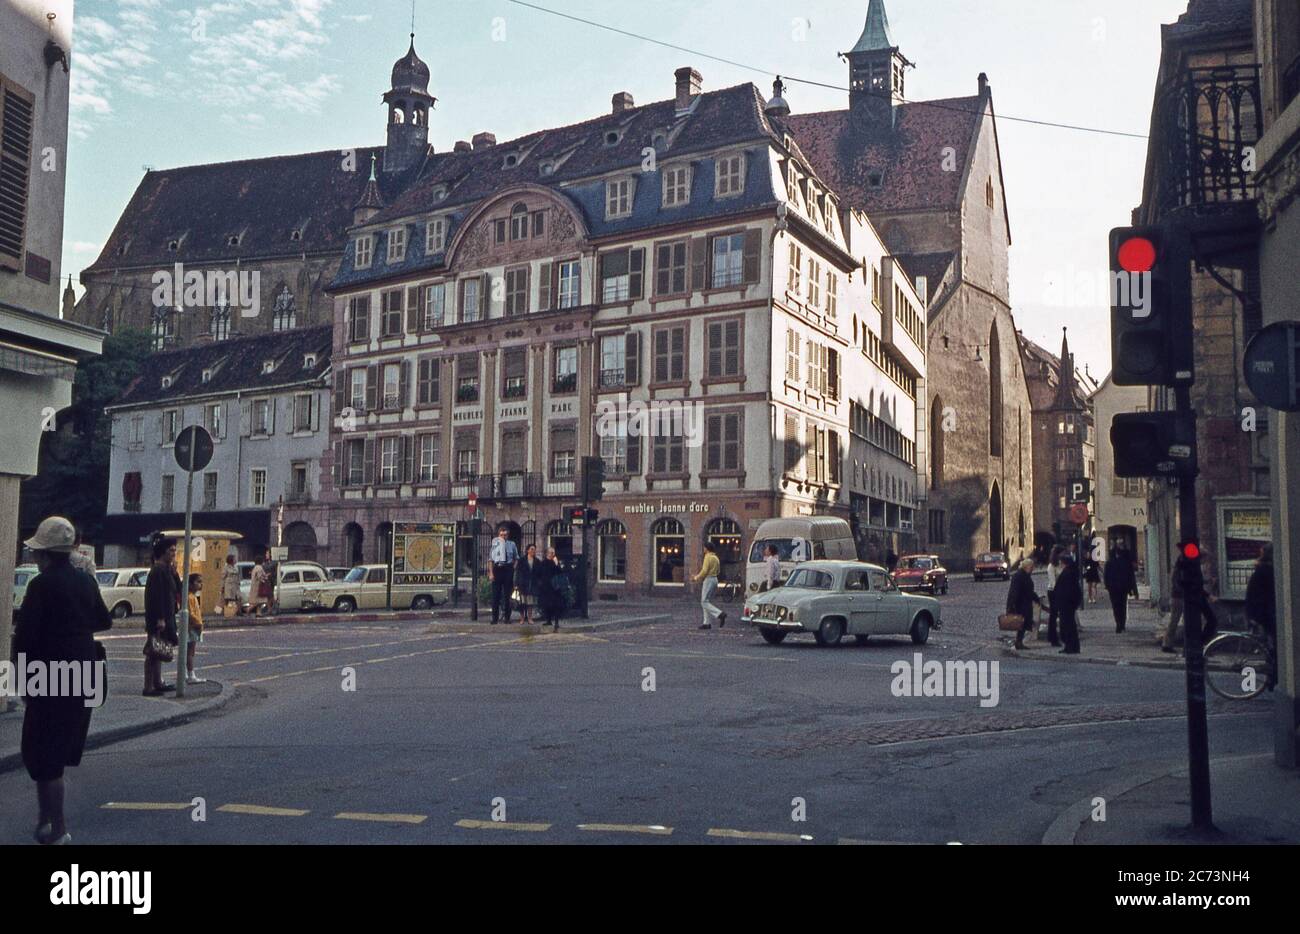 A street scene in Colmar, Alsace, France in 1968. This view is of the Place Jeanne d'Arc looking SE from Rue Vauban. In the background is the church of Eglise St Matthieu. Today some of this area has been pedestrianised. Colmar is a city in the Haut-Rhin department and Grand Est region of north-eastern France. It is the third largest city in Alsace after Strasbourg and Mulhouse. It is renowned for its well-preserved old town, its architecture and museums. Colmar is known as the 'capital of Alsatian wine'. Stock Photo